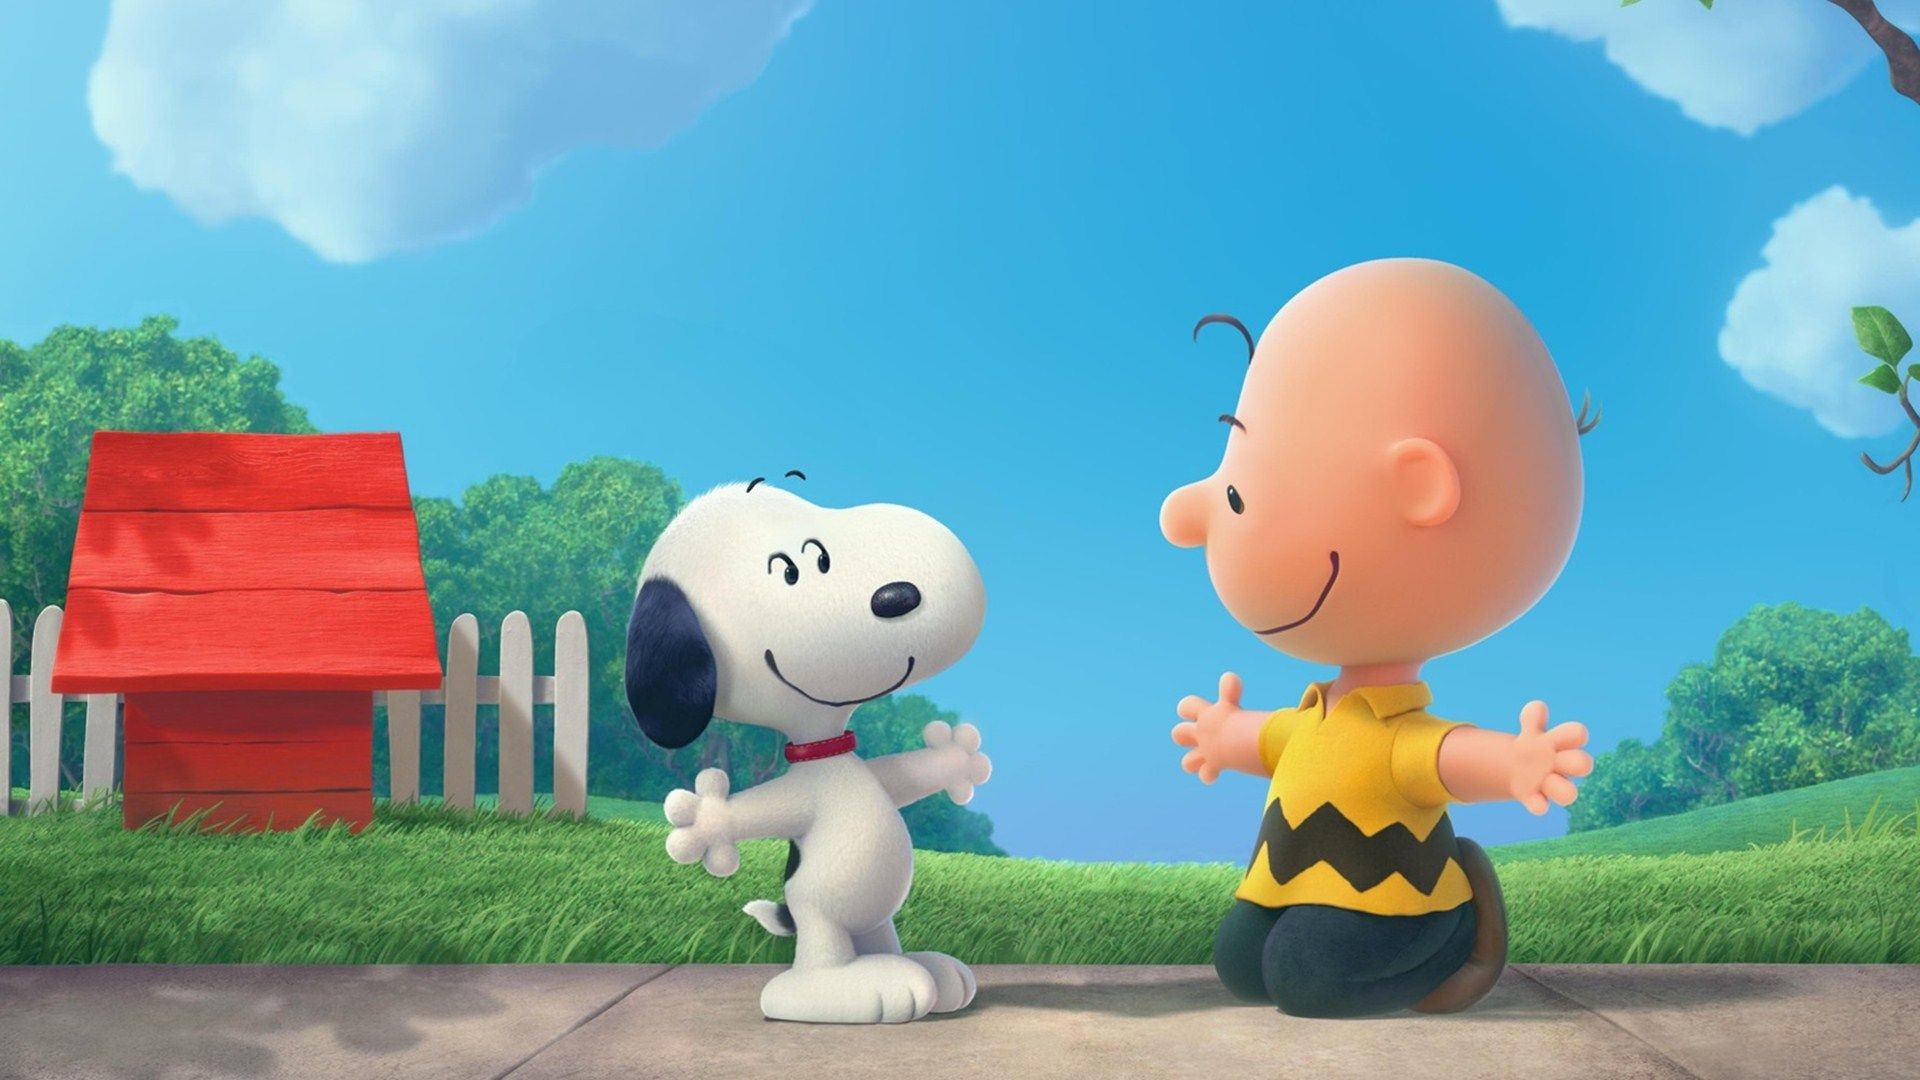 1920x1080 The Peanuts Movie Snoopy And Charlie Brown Wallpaper .